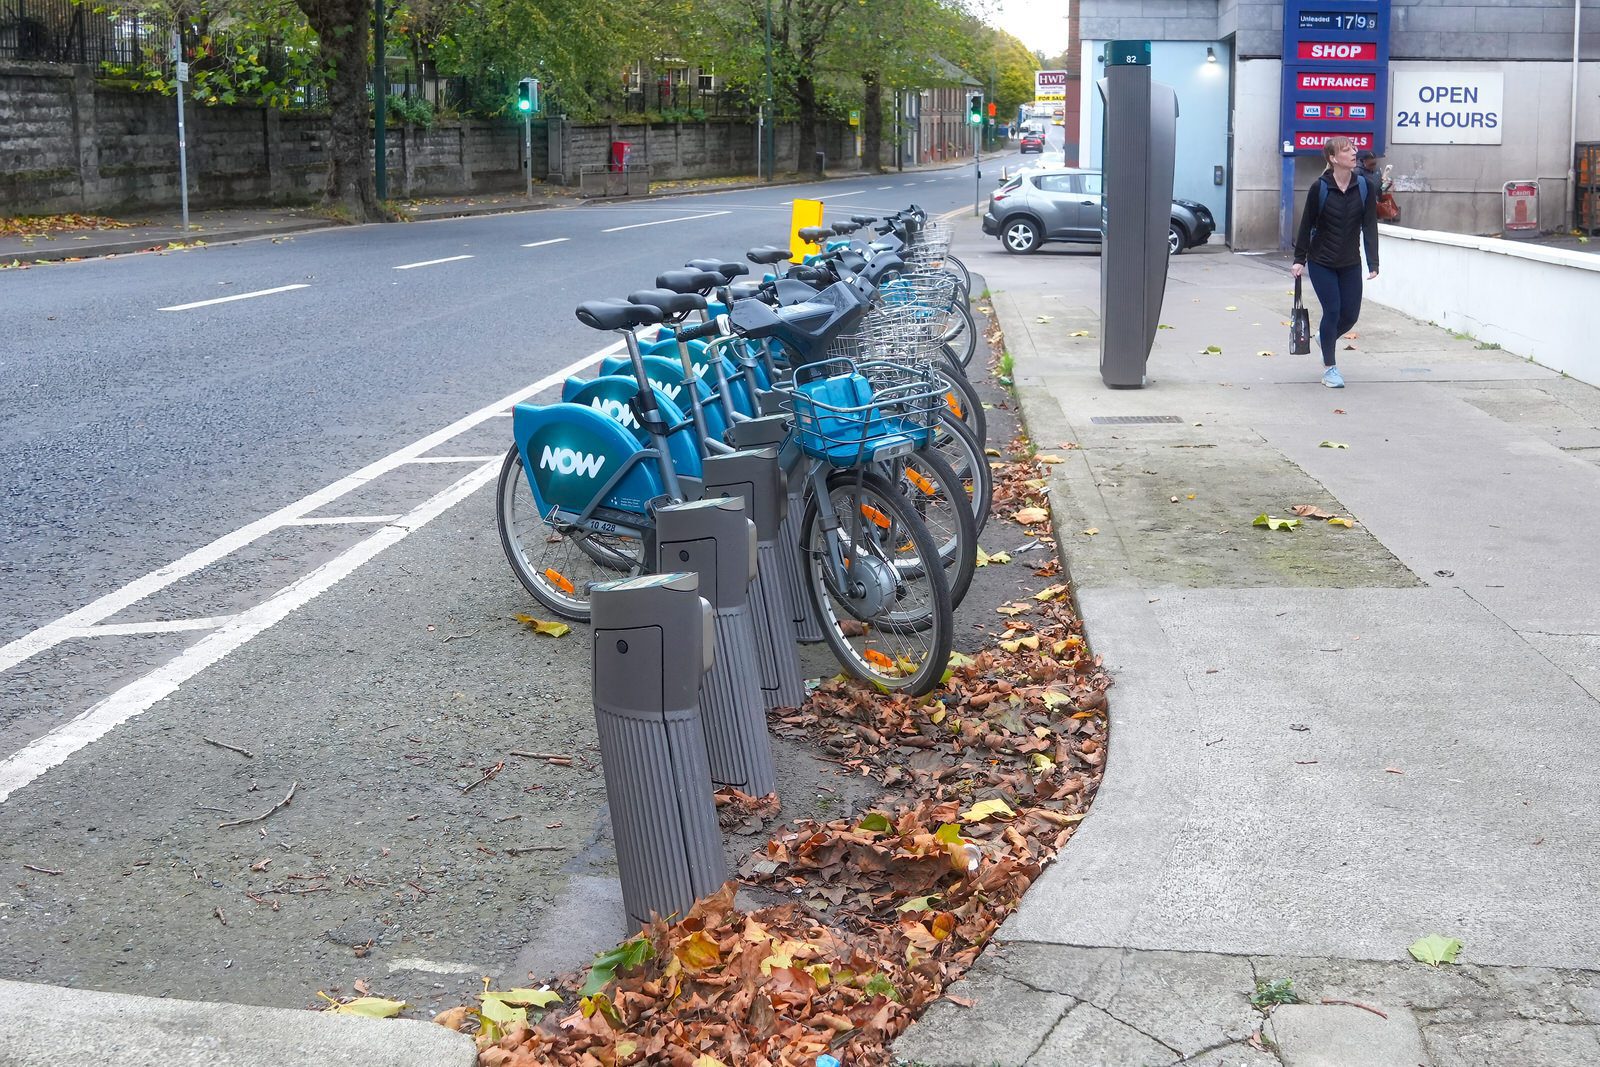 DUBLINBIKES DOCKING STATION 82 IS LOCATED HERE AT MOUNT BROWN 005